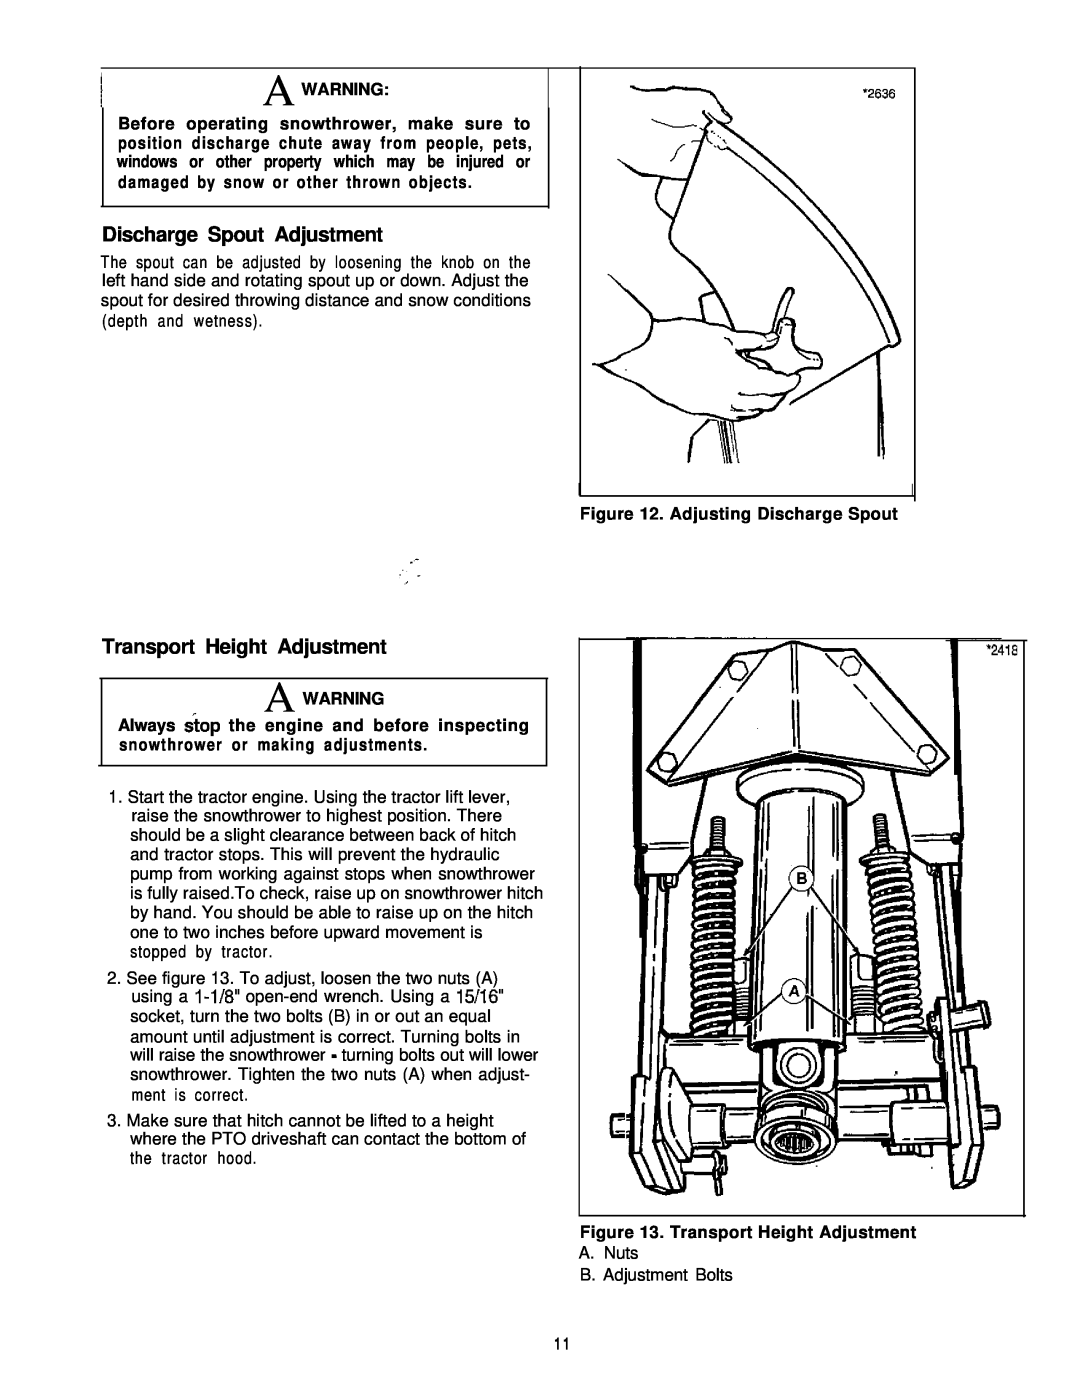 Simplicity 1692243 Discharge Spout Adjustment, Transport Height Adjustment, Awarning, Adjusting Discharge Spout, A Warning 